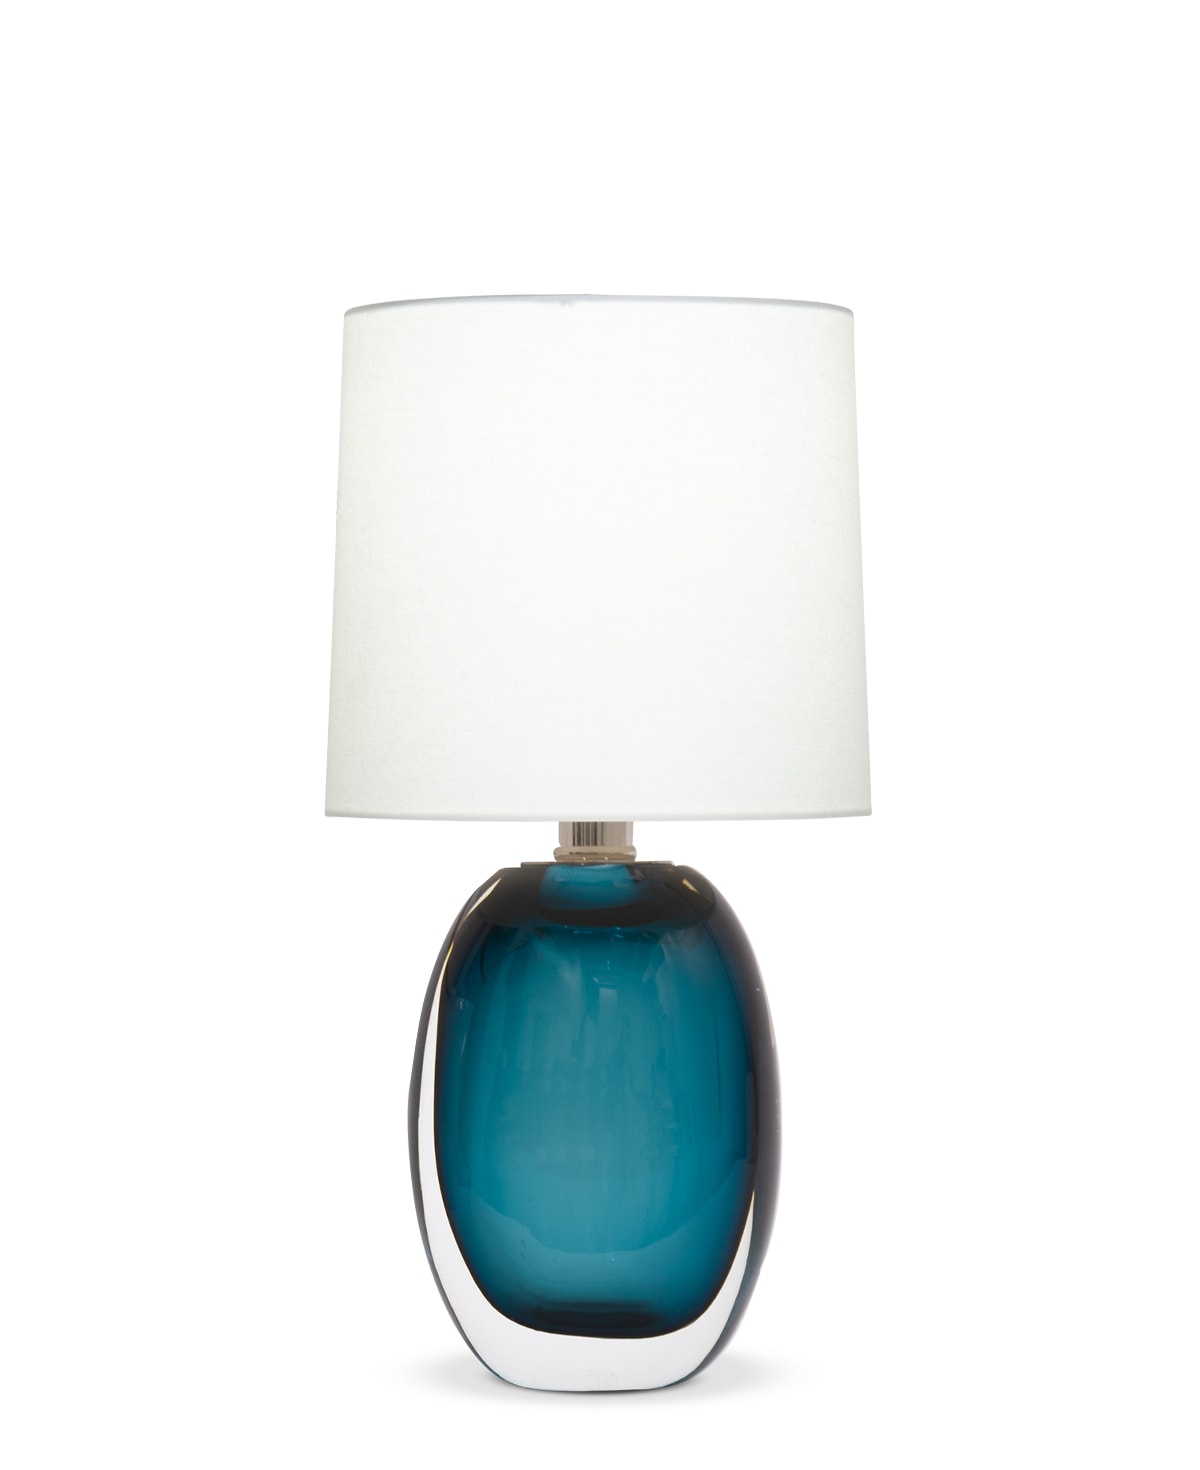 FlowDecor Audrey Table Lamp in glass with blue and off-white linen tapered drum shade (# 4564)